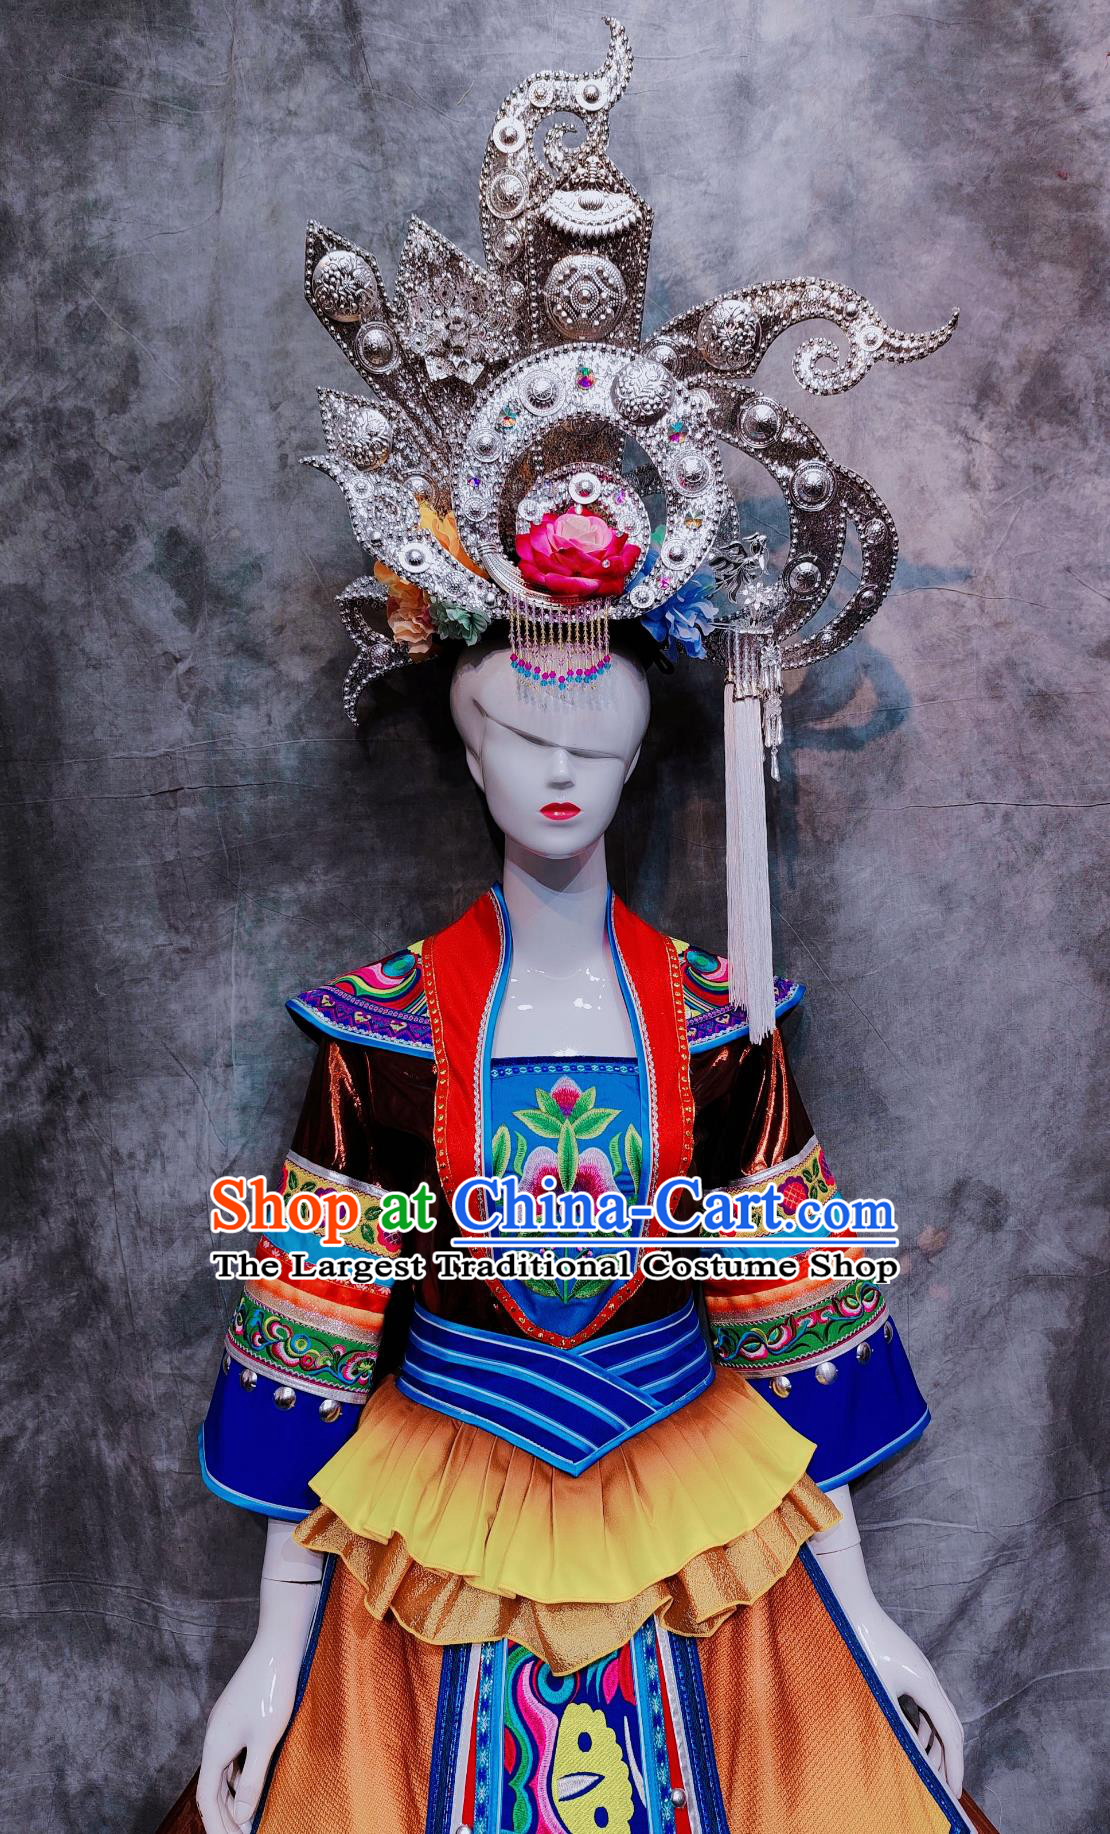 Chinese Ethnic Dance Performance Costume China Dong National Minority Woman Clothing Traditional Guizhou March rd Festival Dress